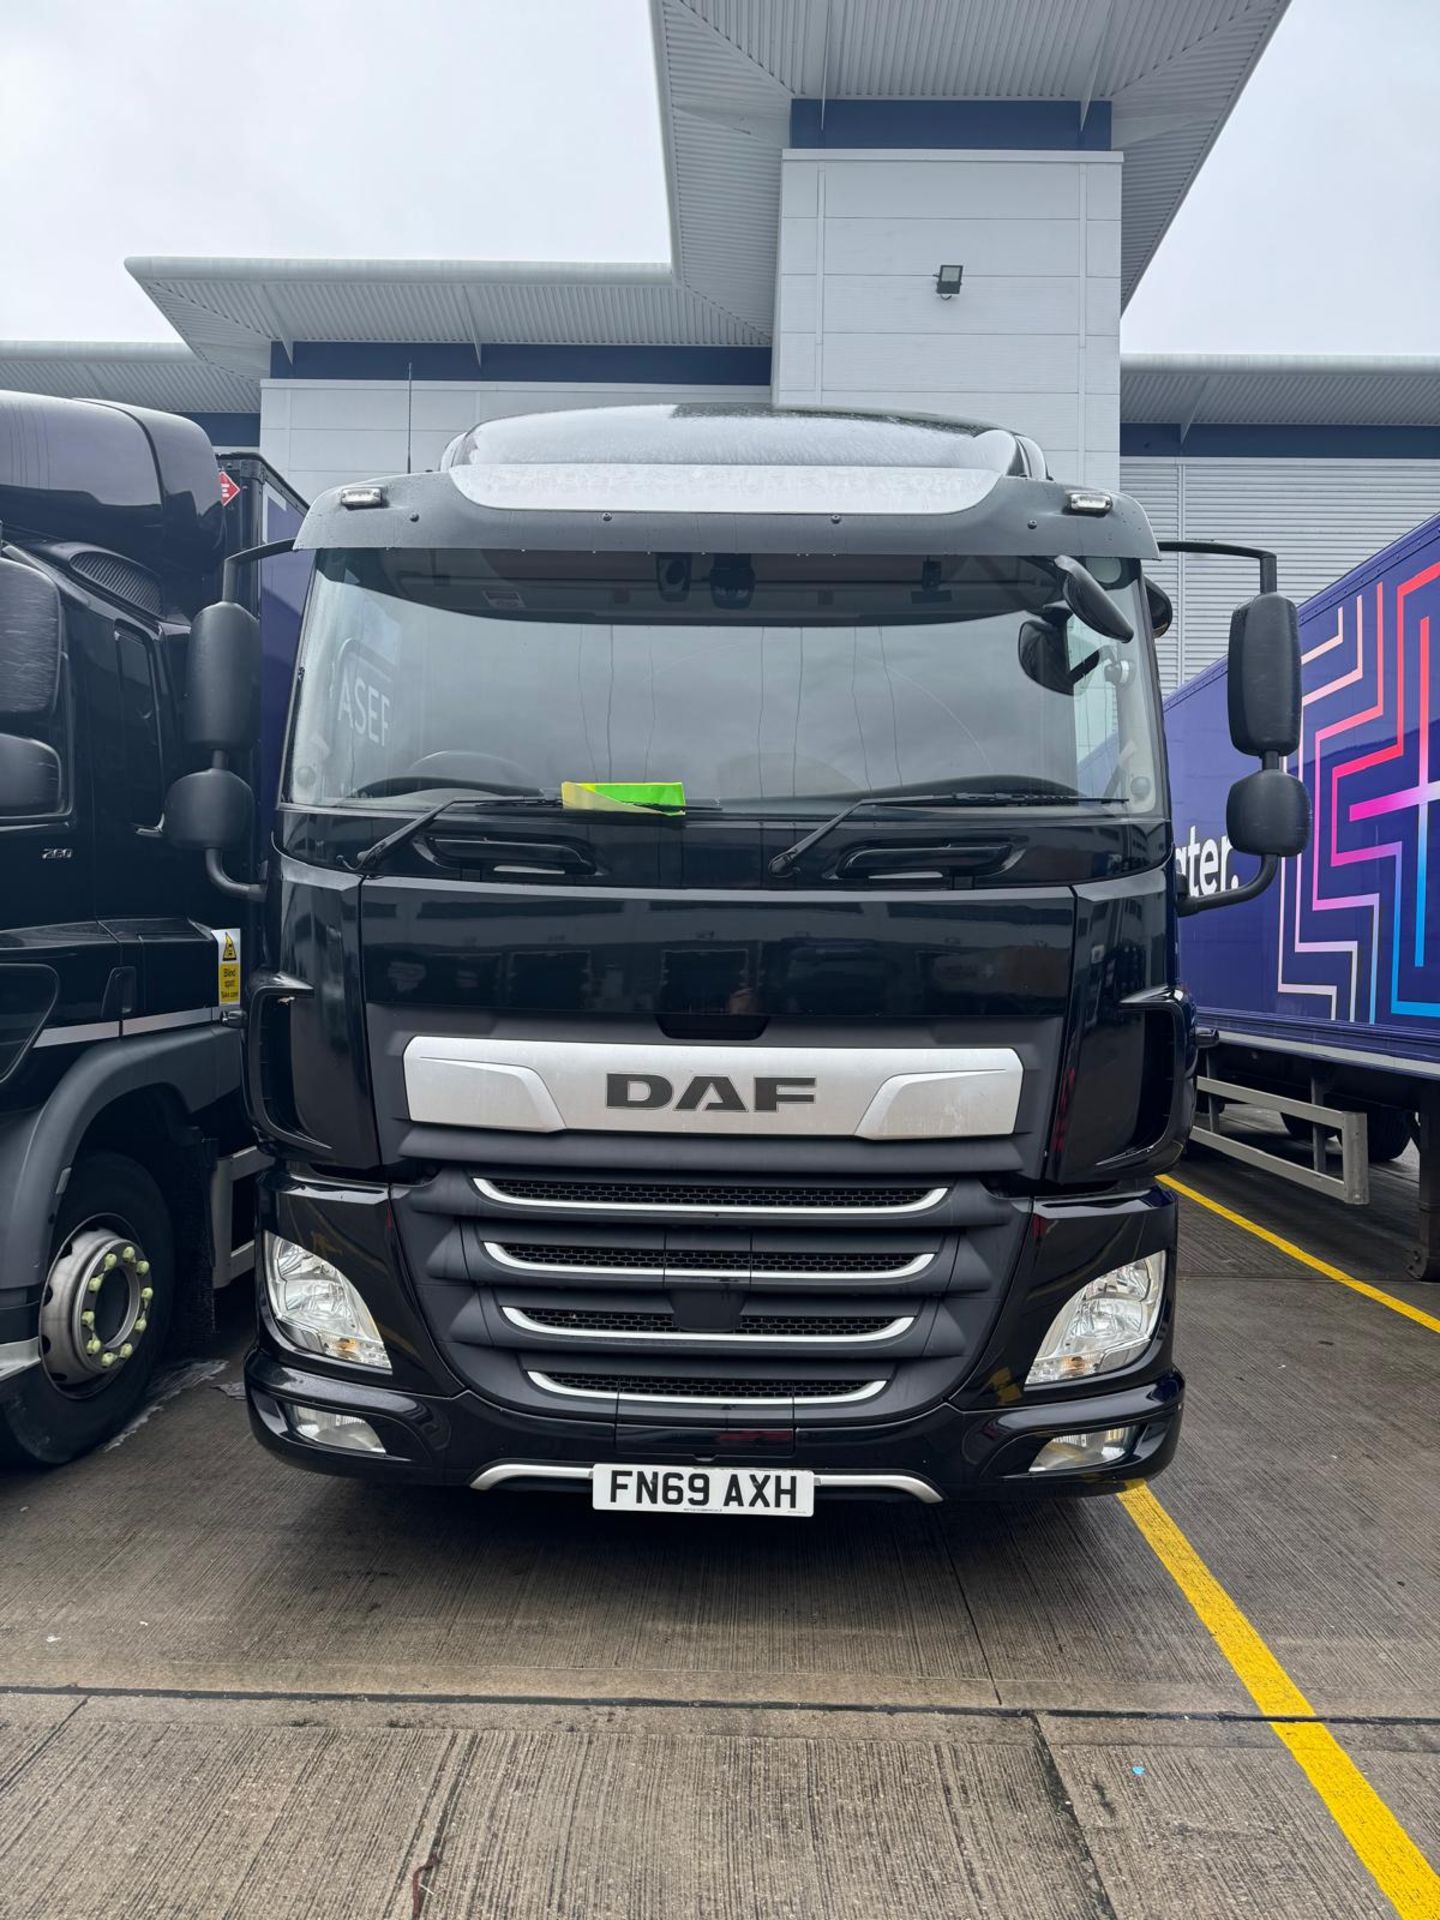 2019, DAF CF 260 FA (Ex-Fleet Owned & Maintained) - FN69 AXH (18 Ton Rigid Truck with Tail Lift) - Image 6 of 22